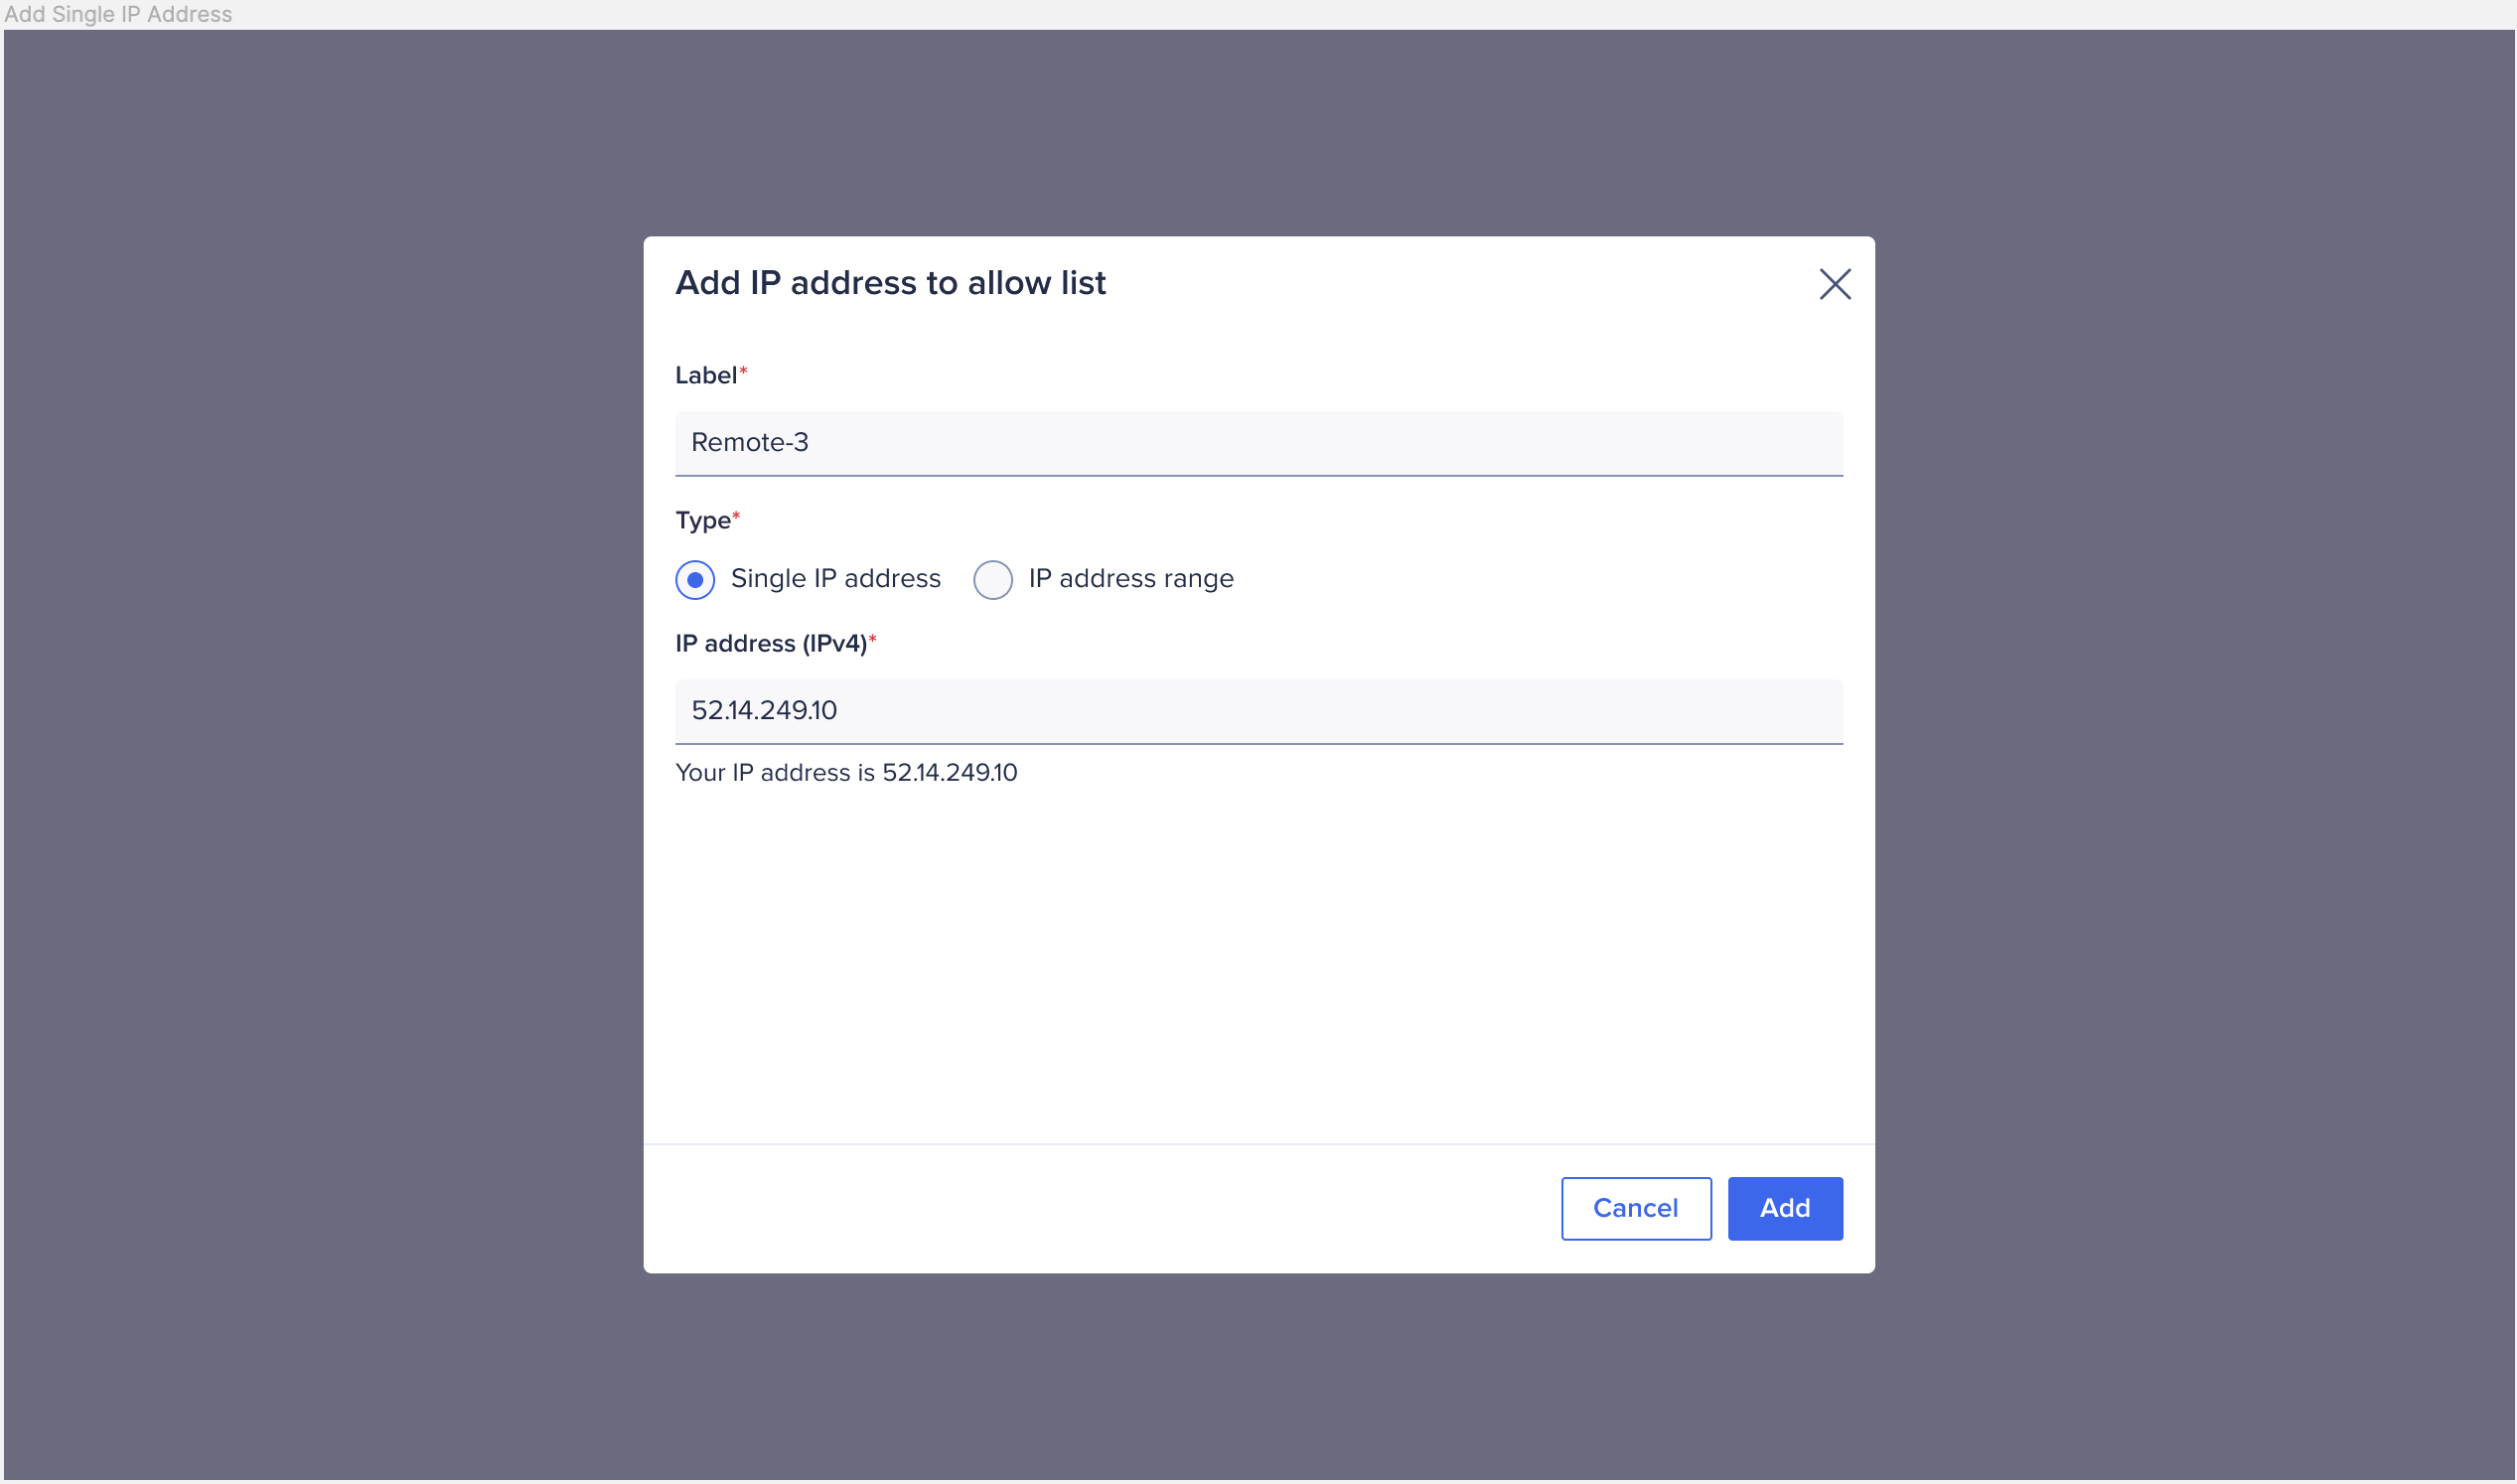 The Add IP address to allow list dialog. You can add a single IP address or IP address range in this dialog.